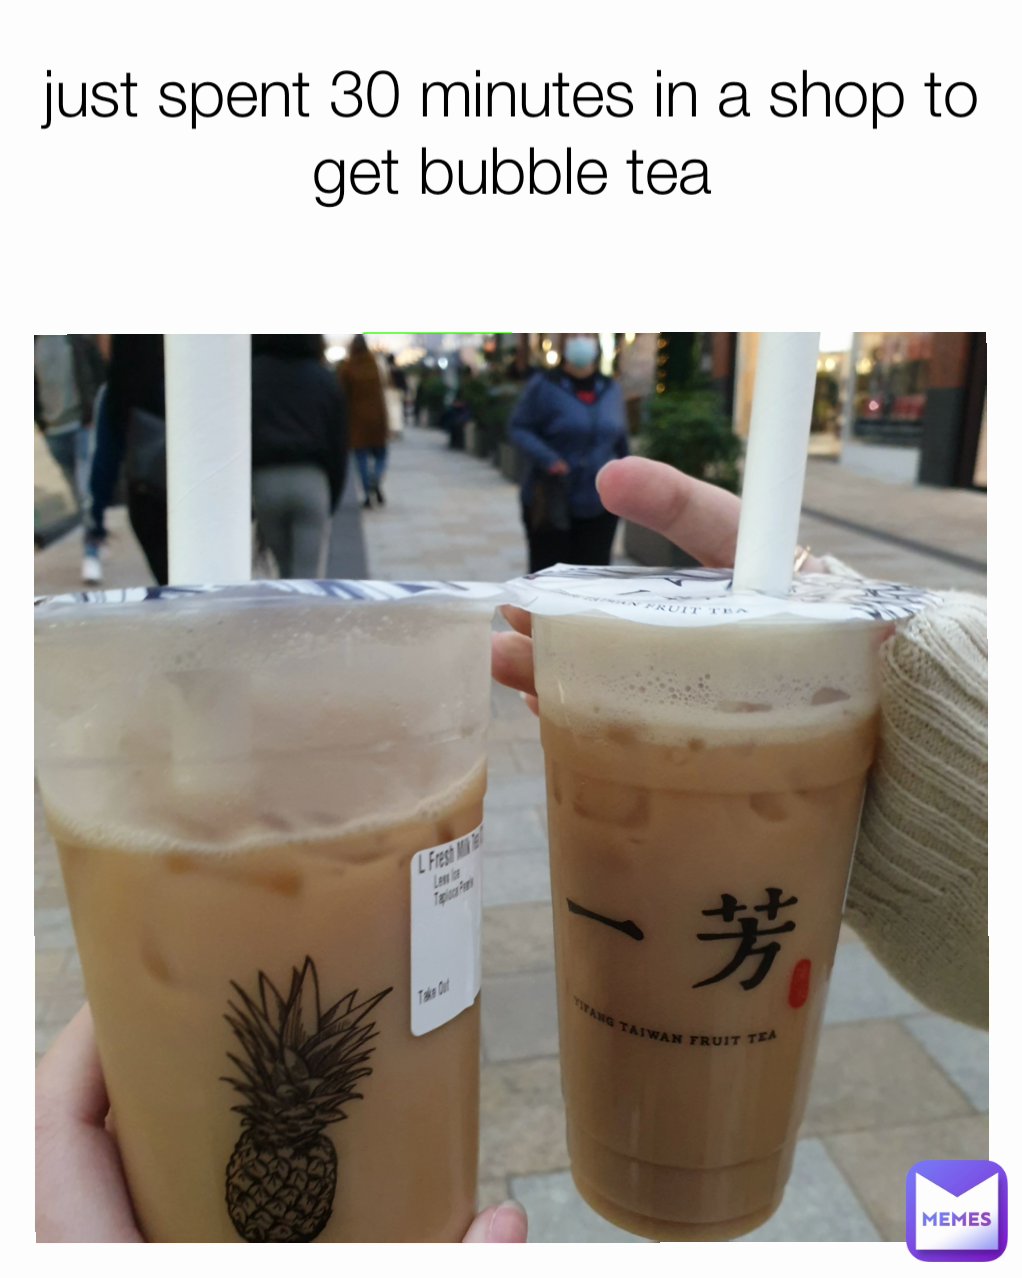 just spent 30 minutes in a shop to get bubble tea